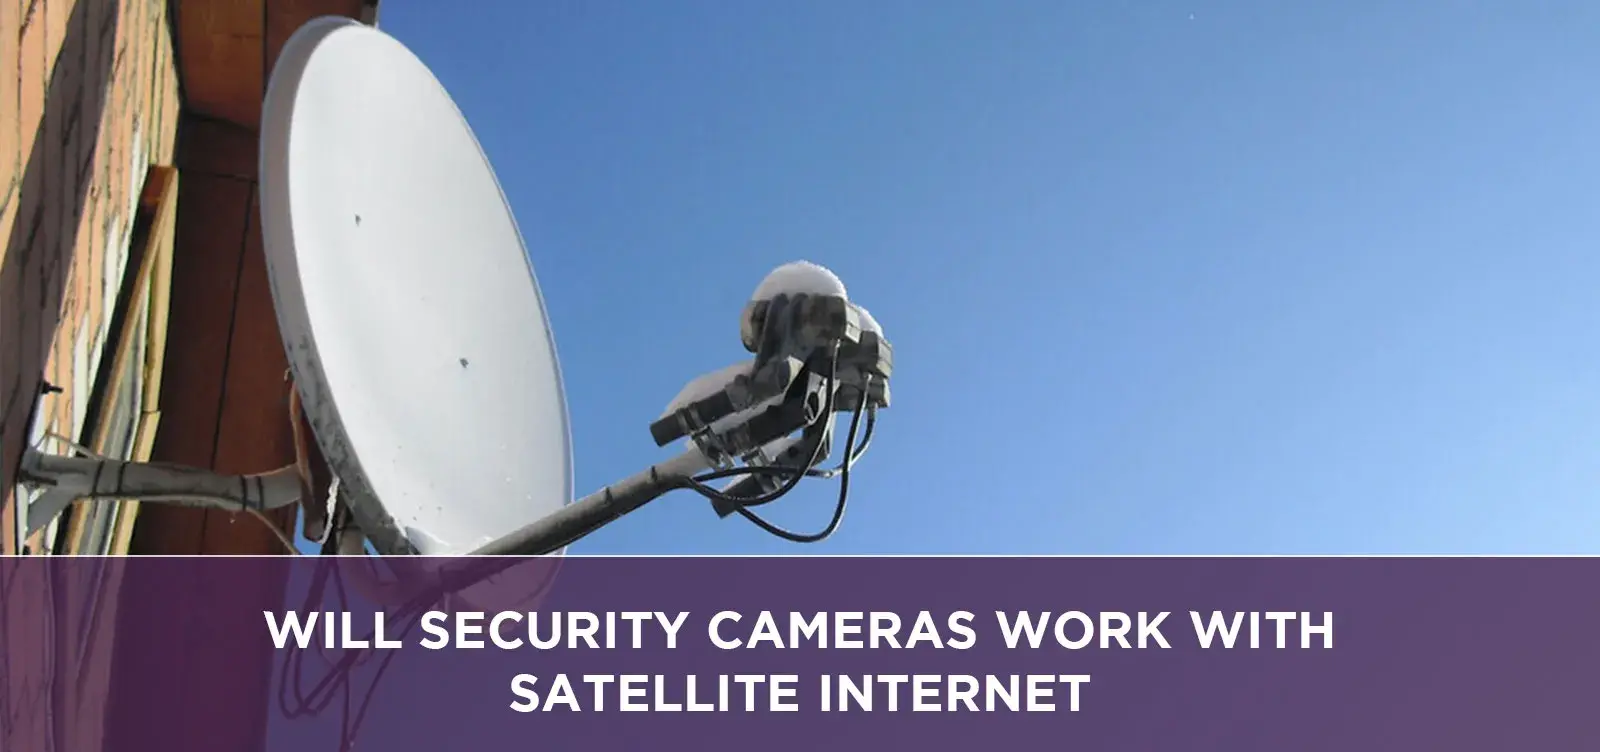 Will Security Cameras Work With Satellite Internet?